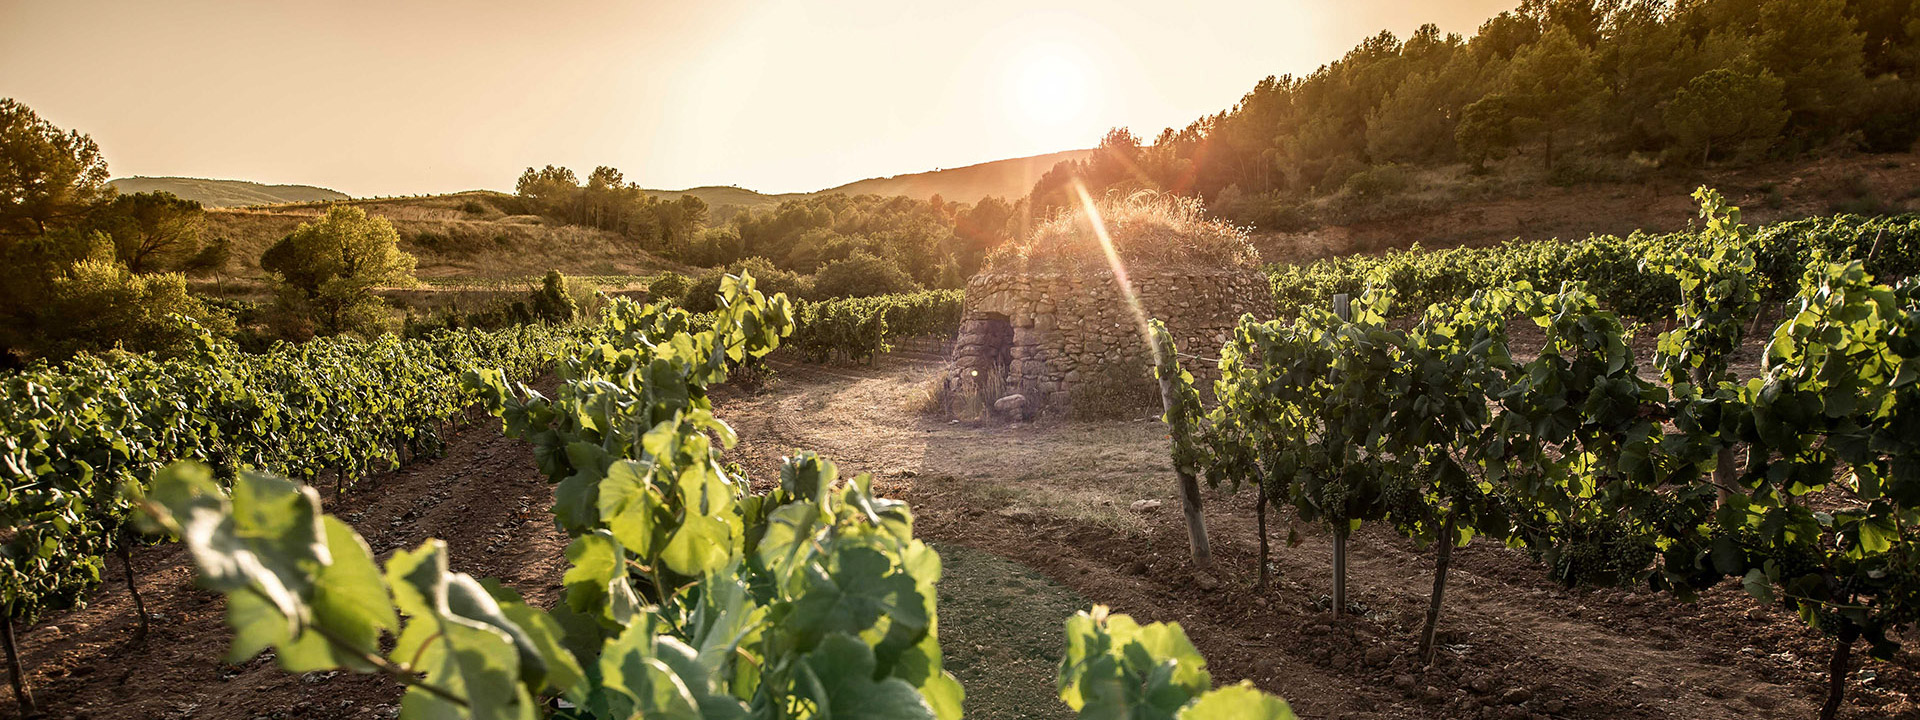 Sunrise at a vineyard, with rays of light appearing from behind the mountains, illuminating the grapevines. 